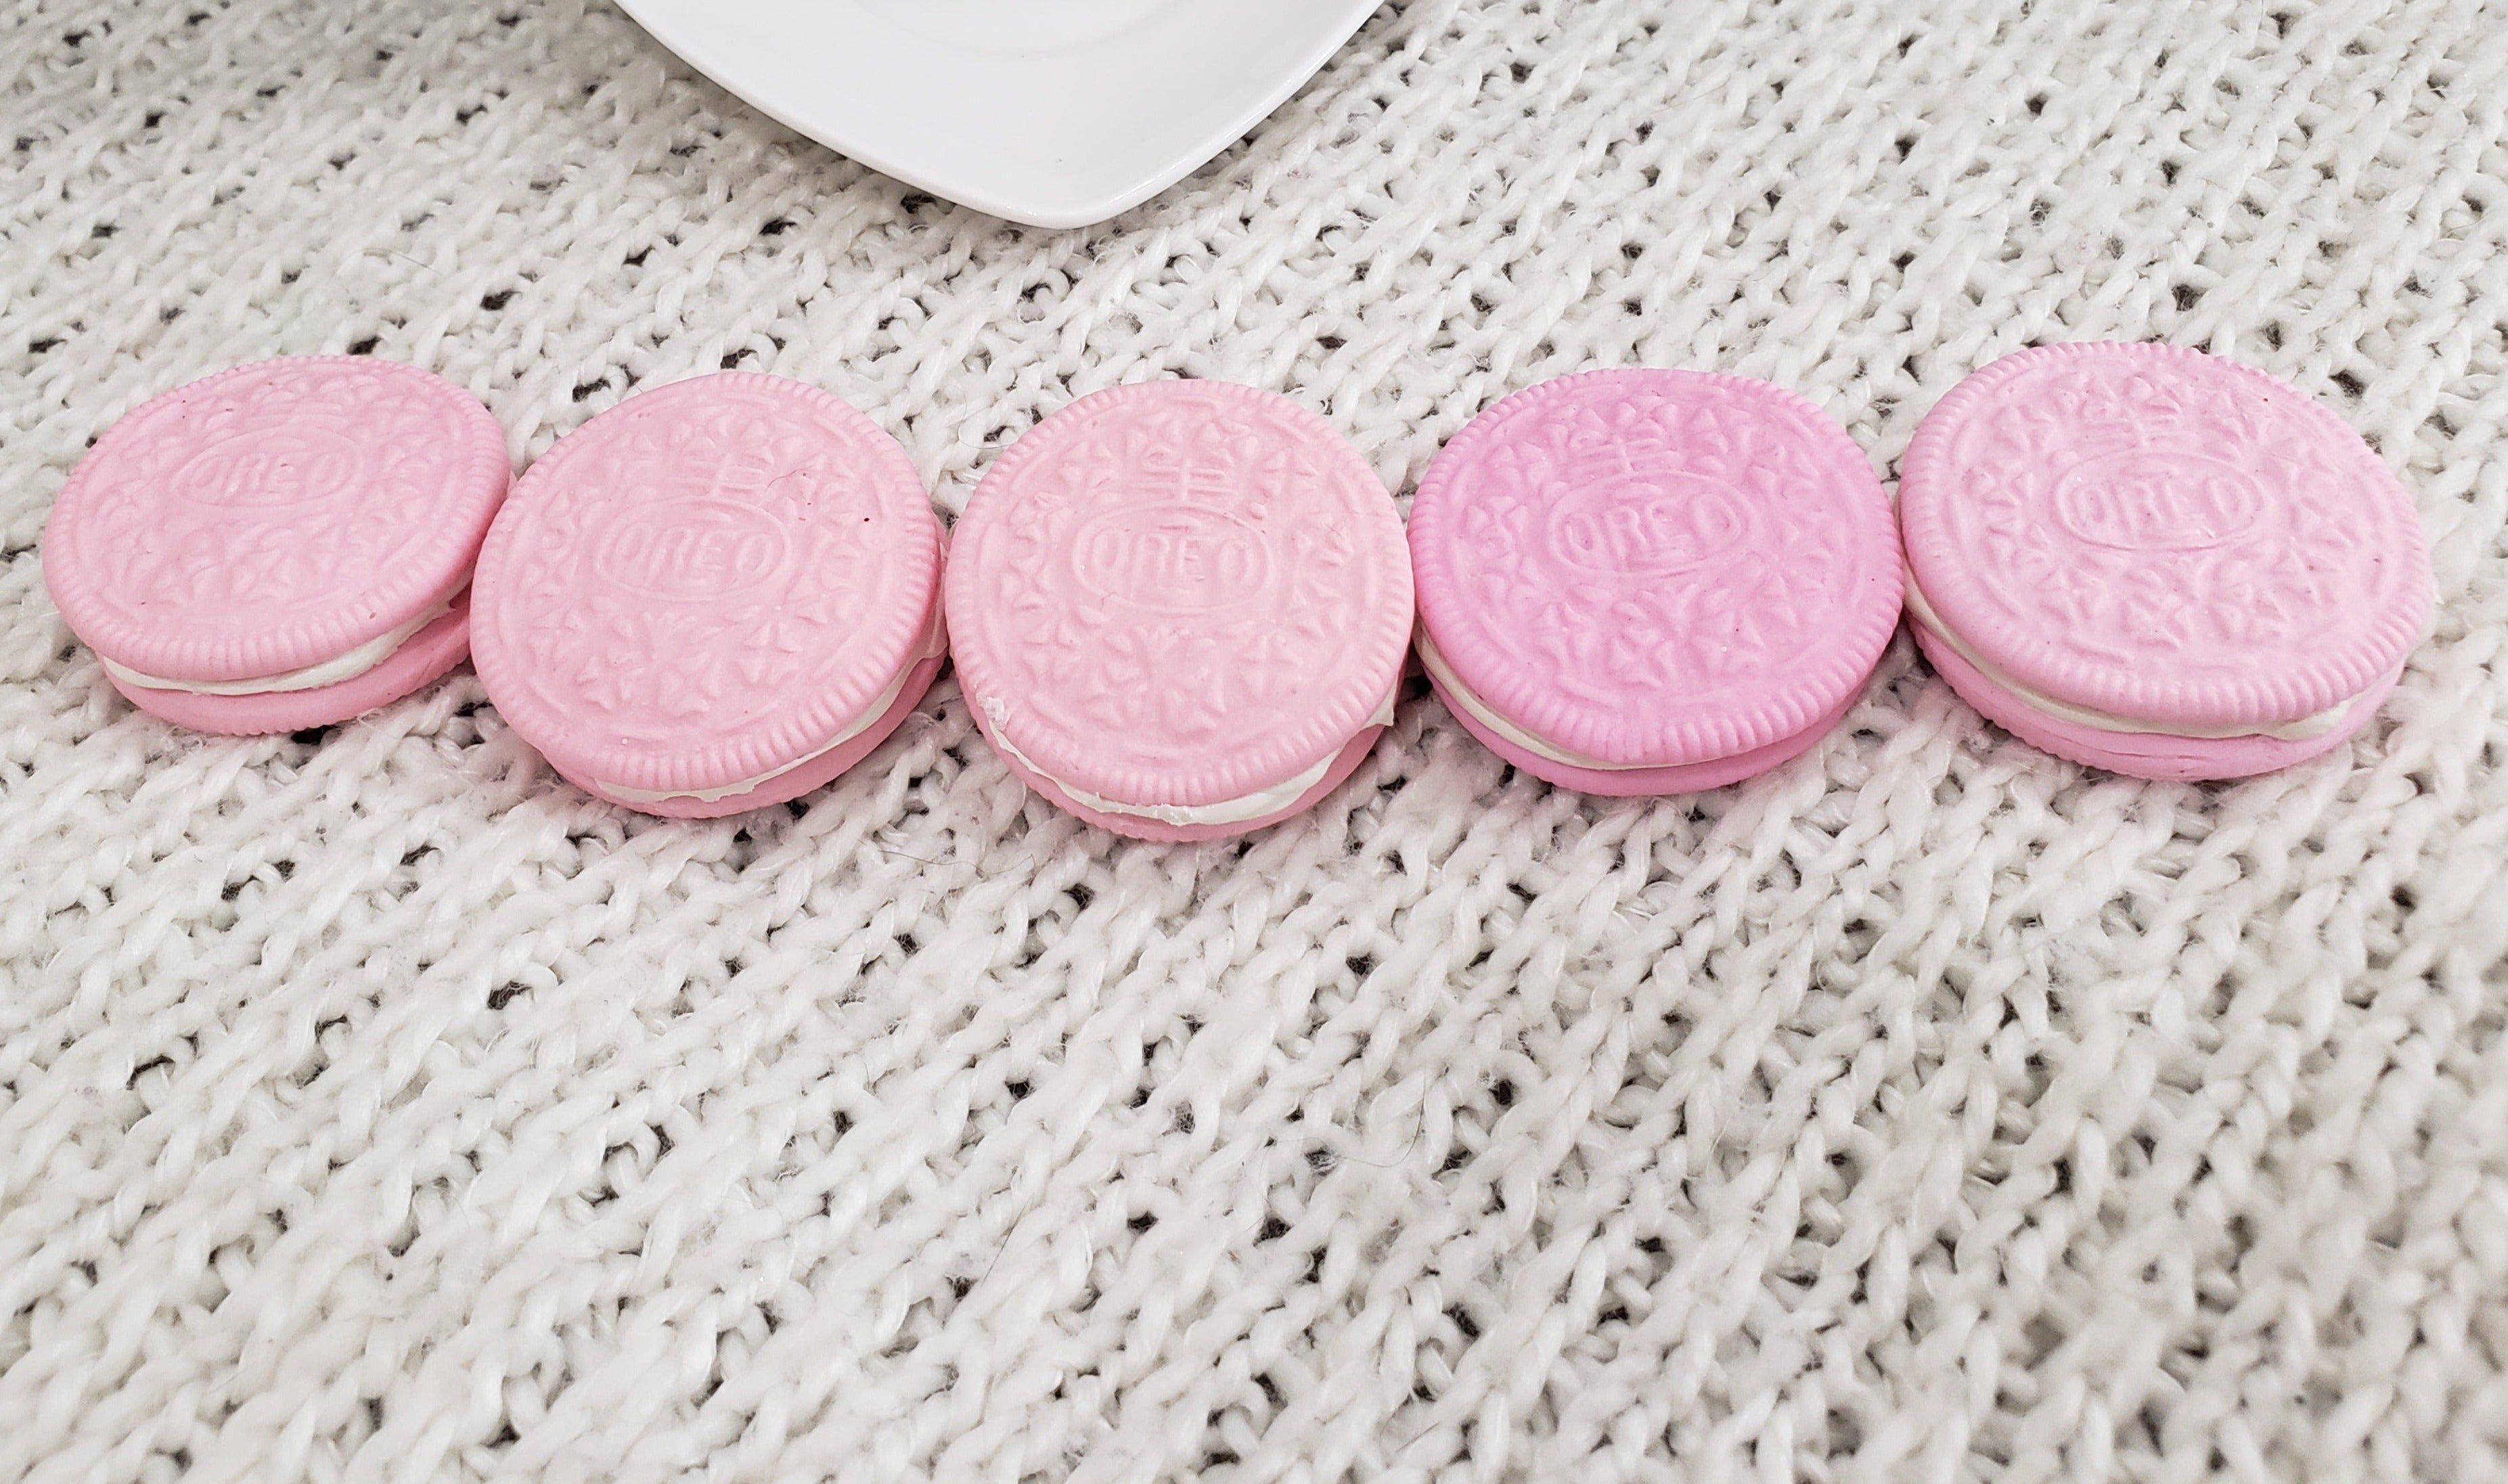 A row of pink Oreo cookies on a white blanket - Oreo, pink